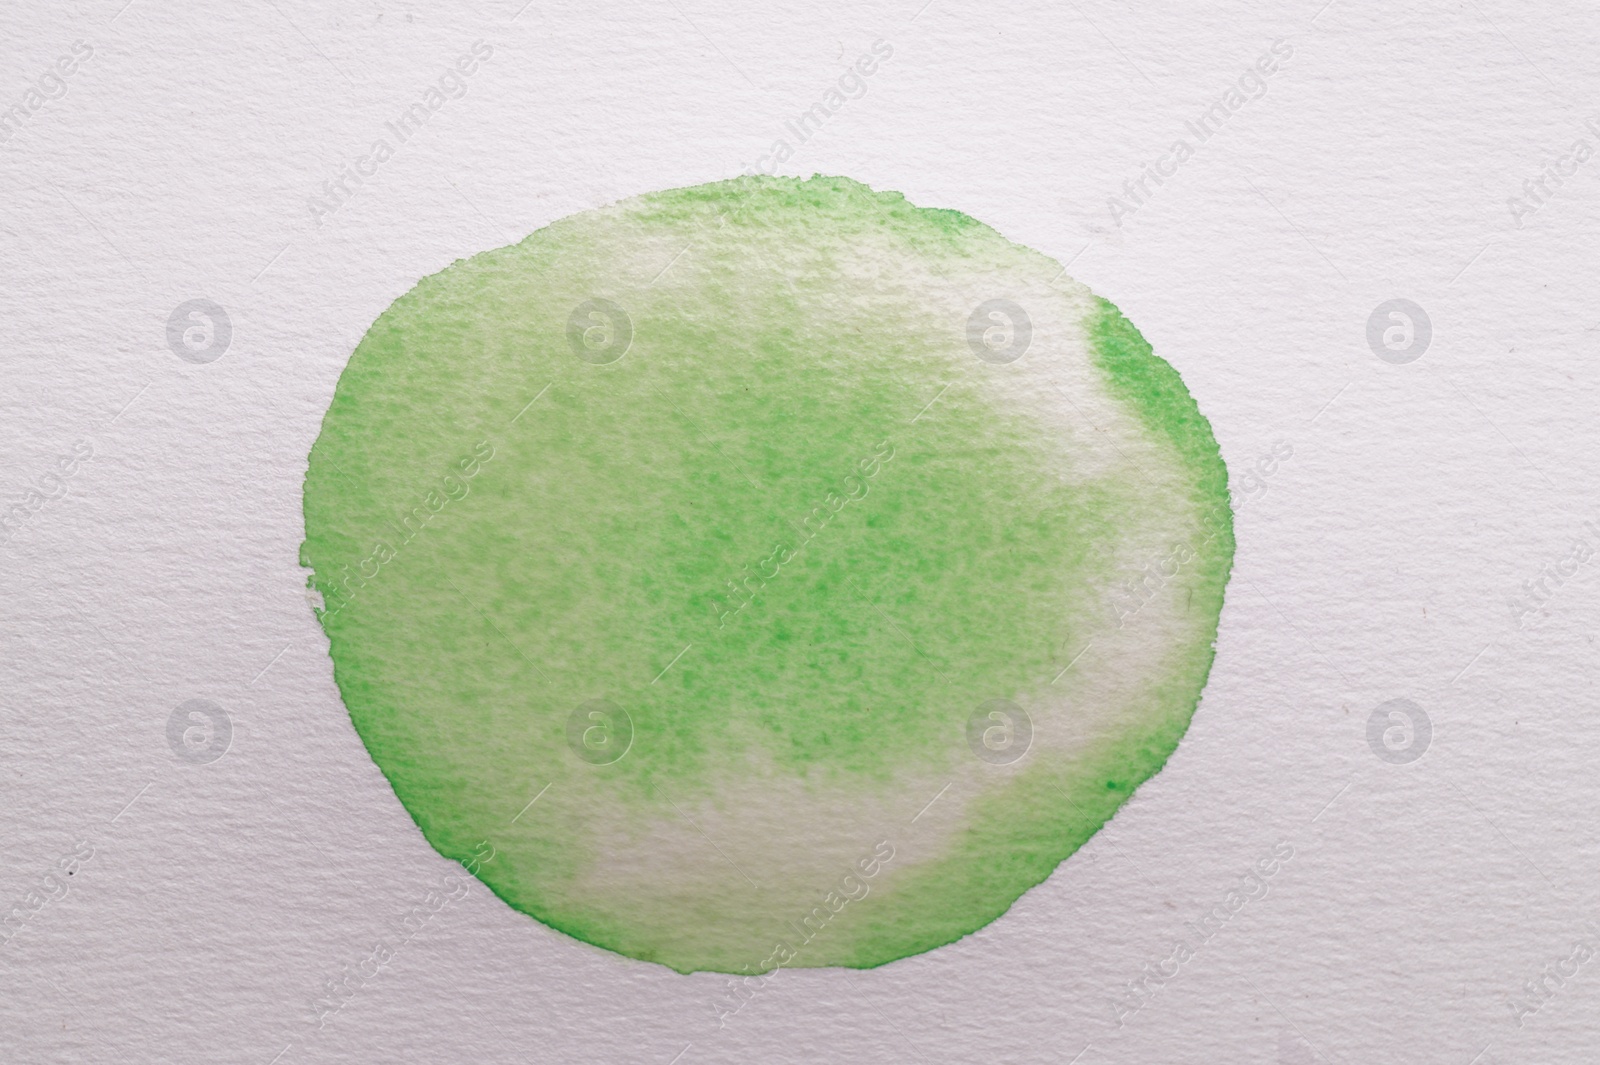 Photo of Blot of green watercolor paint on white paper, top view